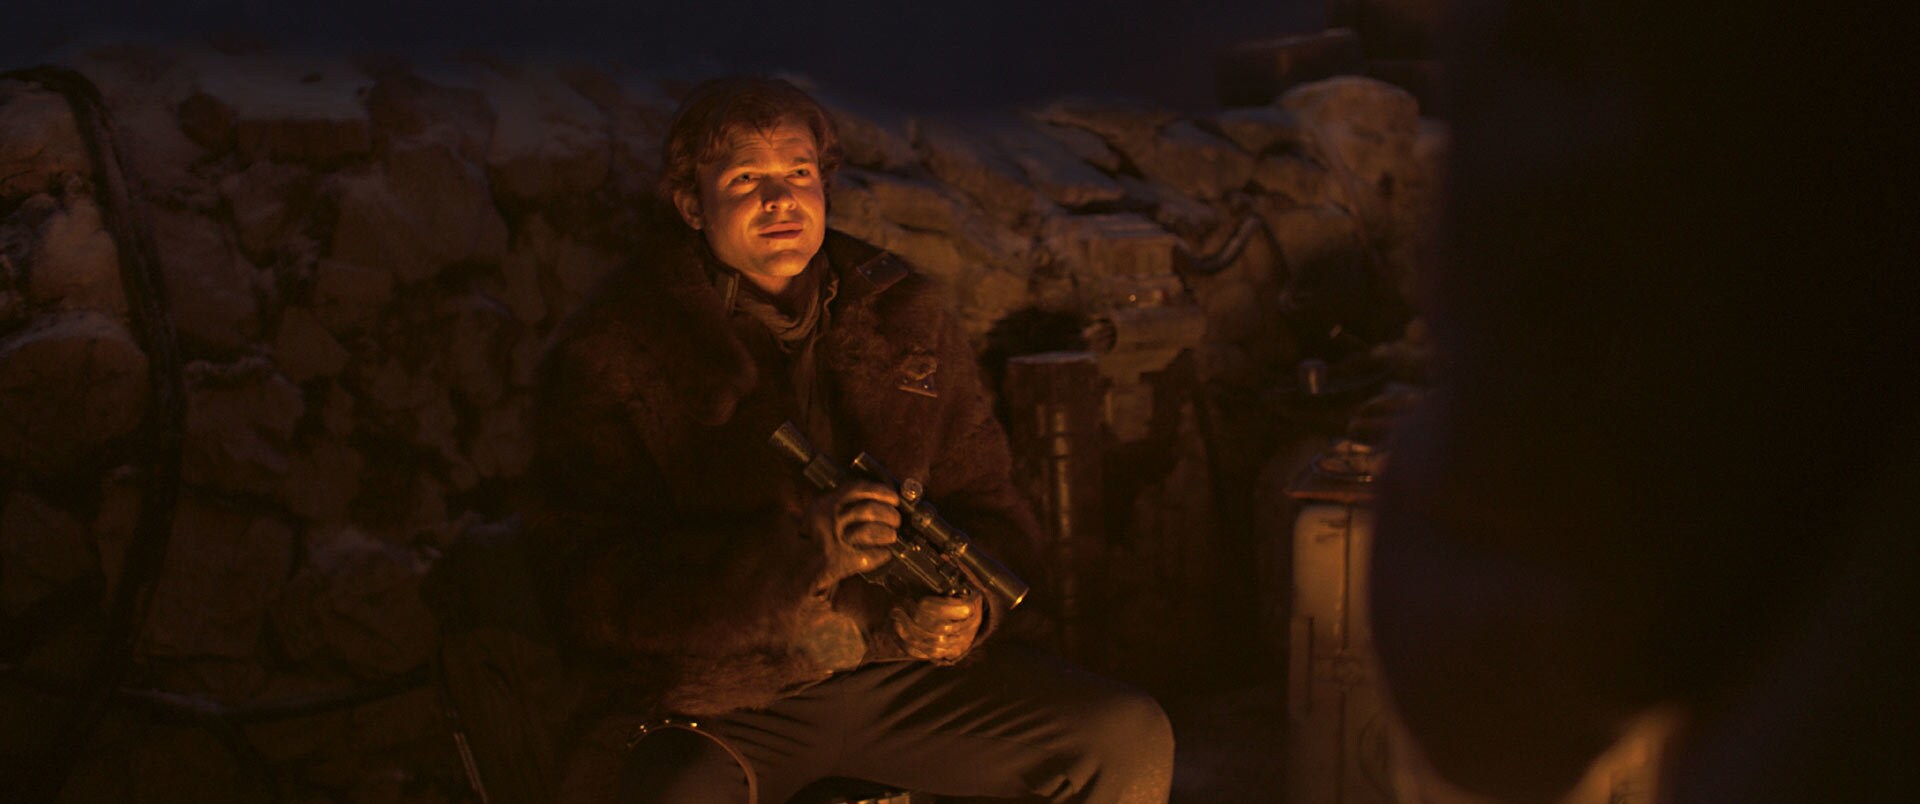 At night, Han tells his story. All he wants is to buy a starship and go back for the girl he love...